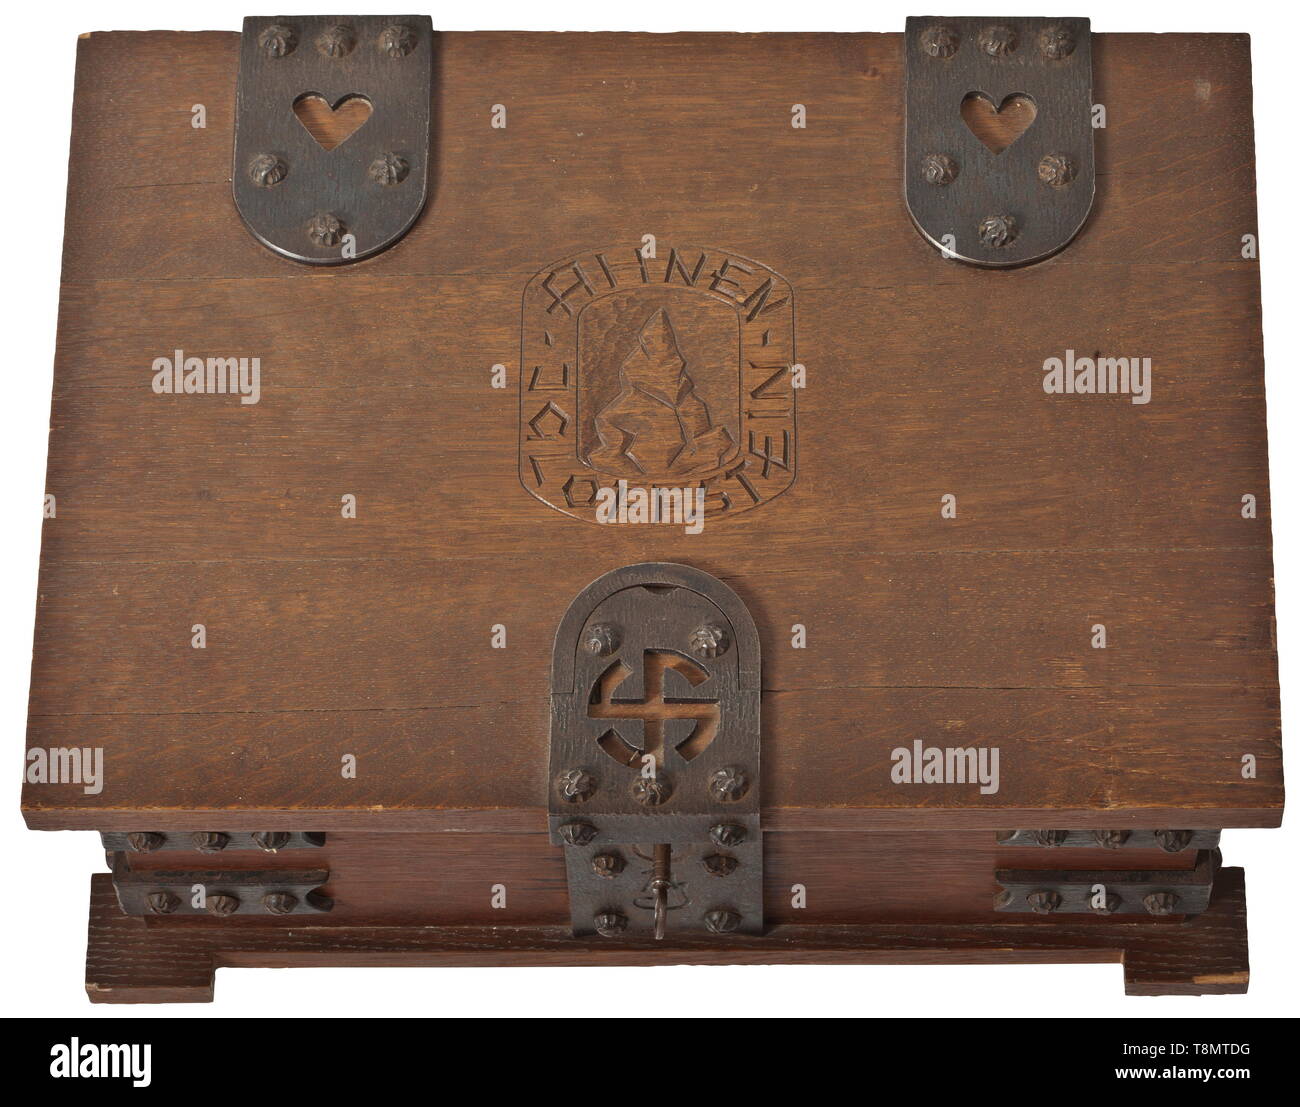 An ancestral chest Made from solid, stained oak wood, the folding lid and the base built of multiple layers, on the side inlaid runes of life and death made from non-ferrous metal, heavy, wrought-iron fittings (the lid with an openwork sun wheel, on the front side an engraved monogram). The lid with a cut rock, surrounded by the inscription 'Ahnen - Igloffstein'. Complete with lock and key. Slightly damaged in parts, signs of age. Dimensions circa 47 x 35 x 20 cm. For the storage of the family's treasure. Attic find in extremely good condition. historic, historical, 20th ce, Editorial-Use-Only Stock Photo